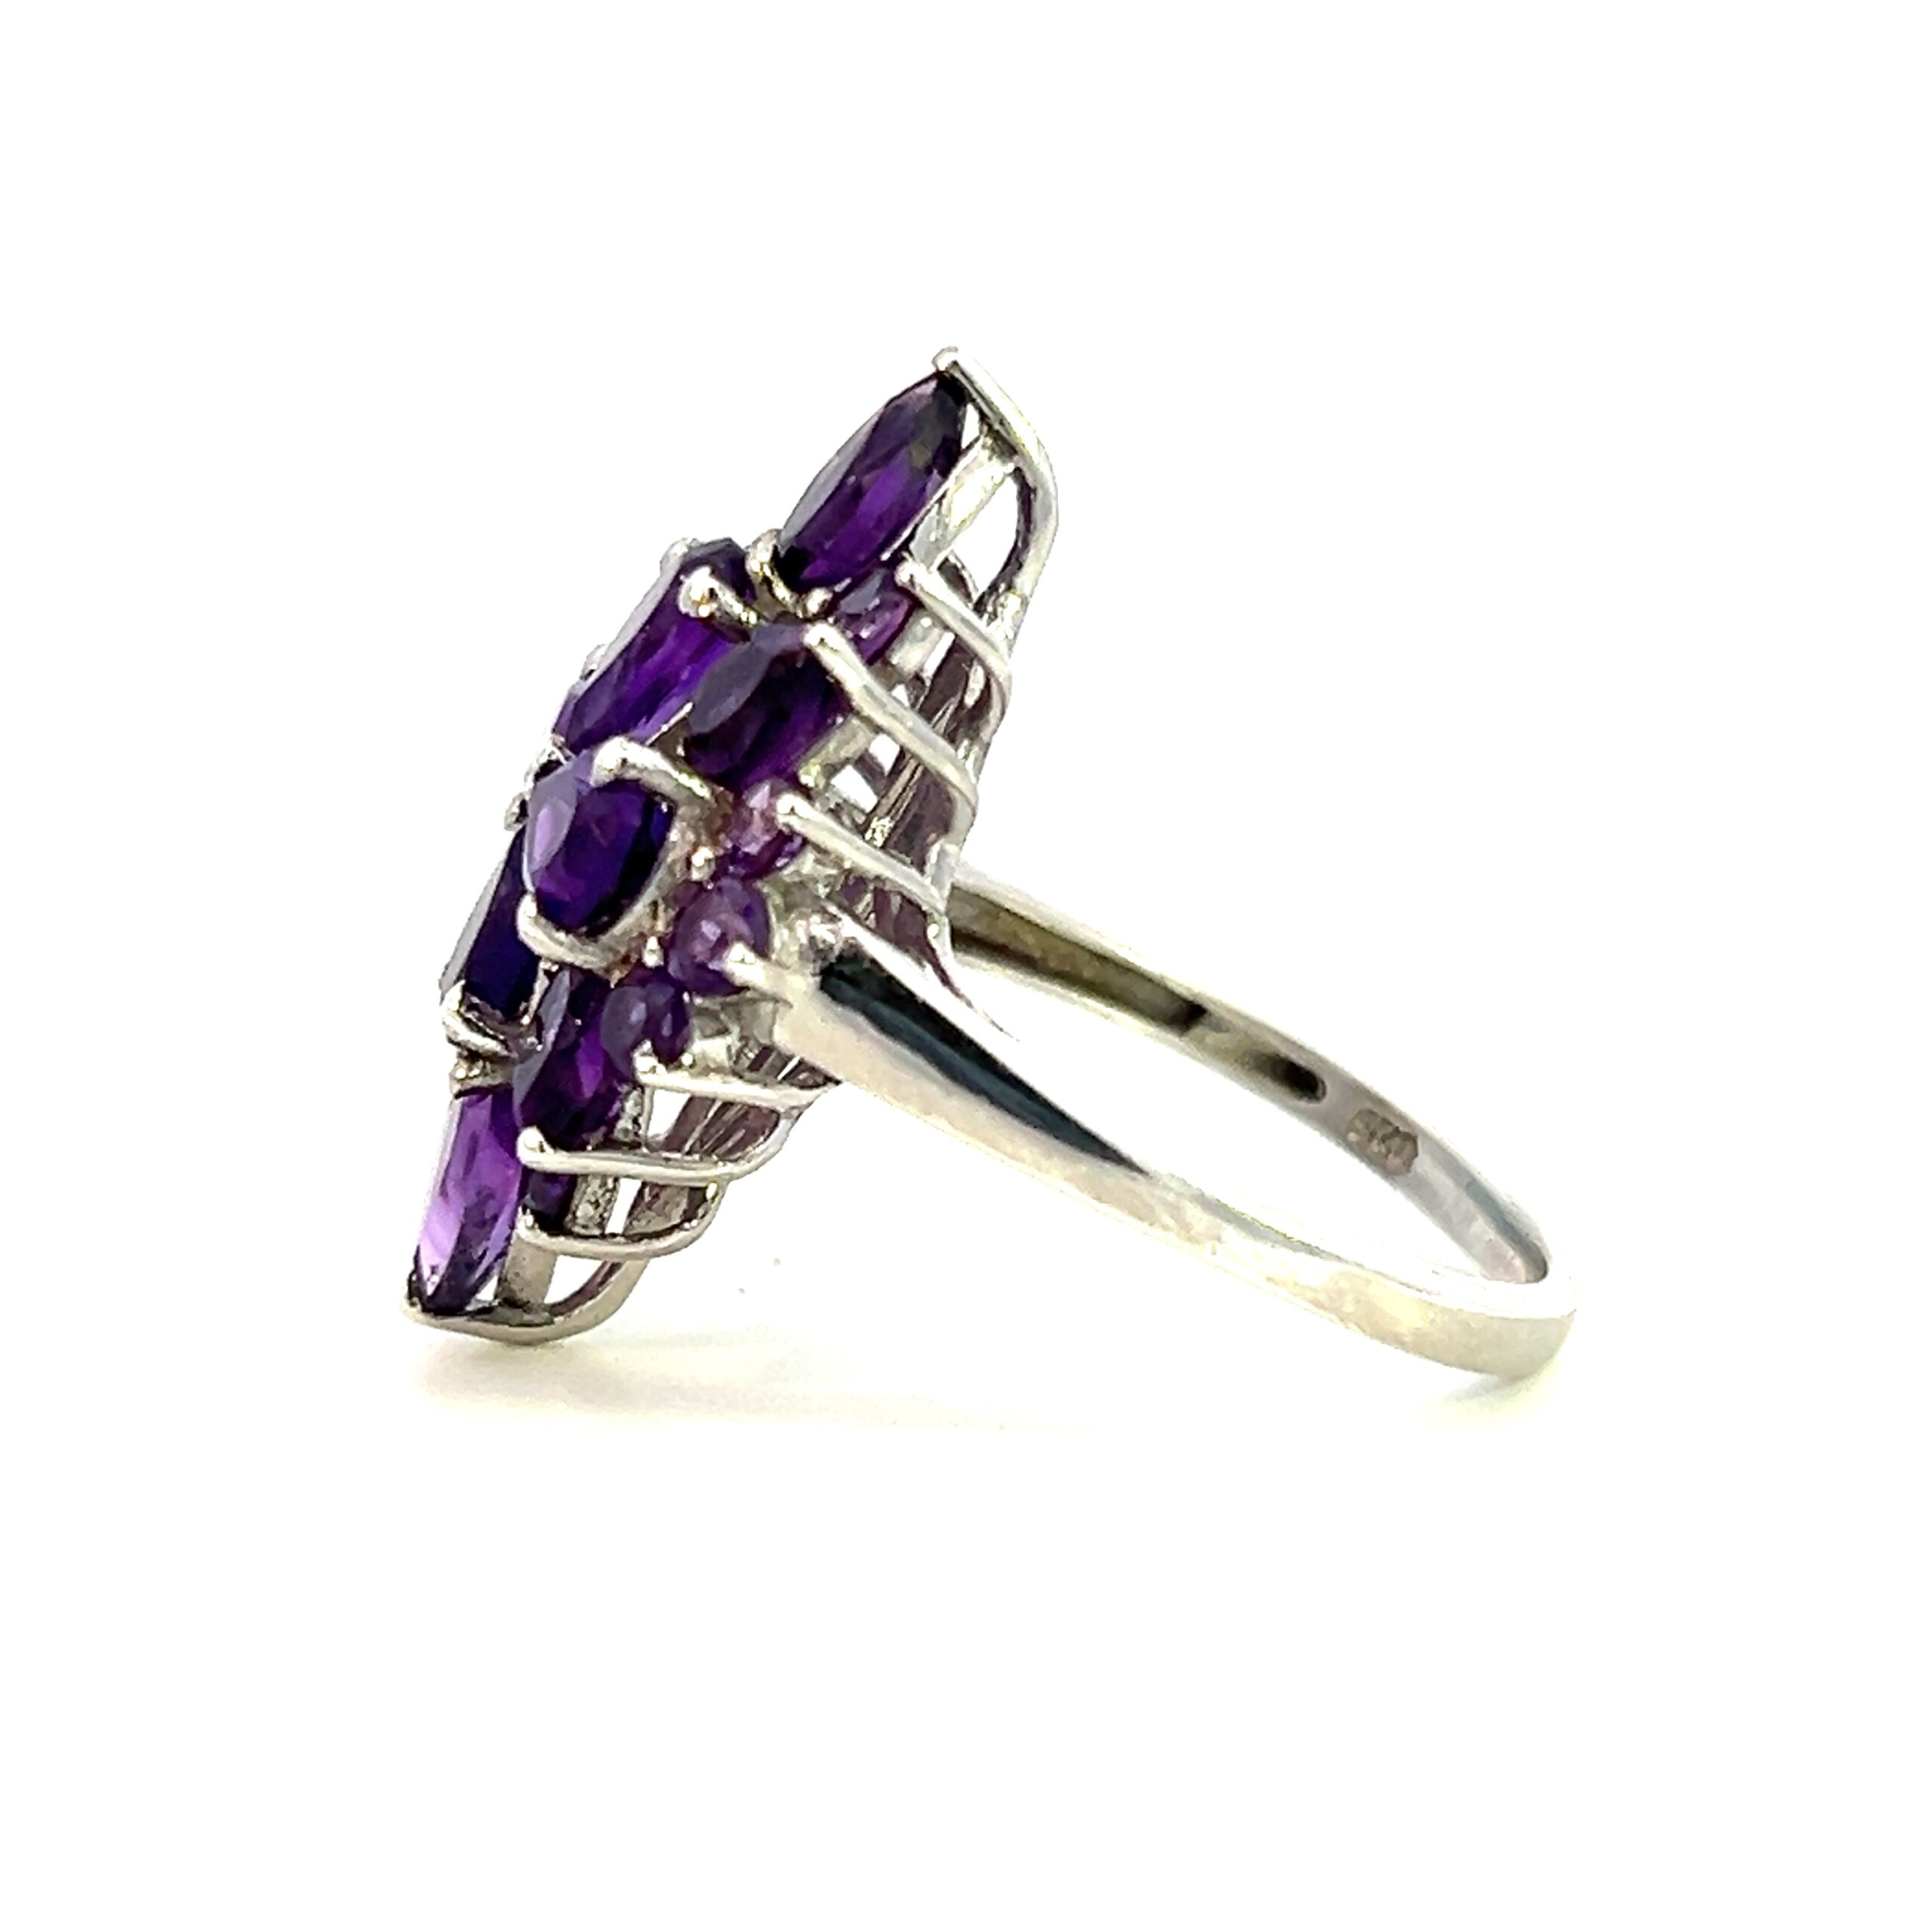 One estate sterling silver amethyst ring containing faceted amethysts in round and pear shapes creating an elongated flower design with points to the north and south.